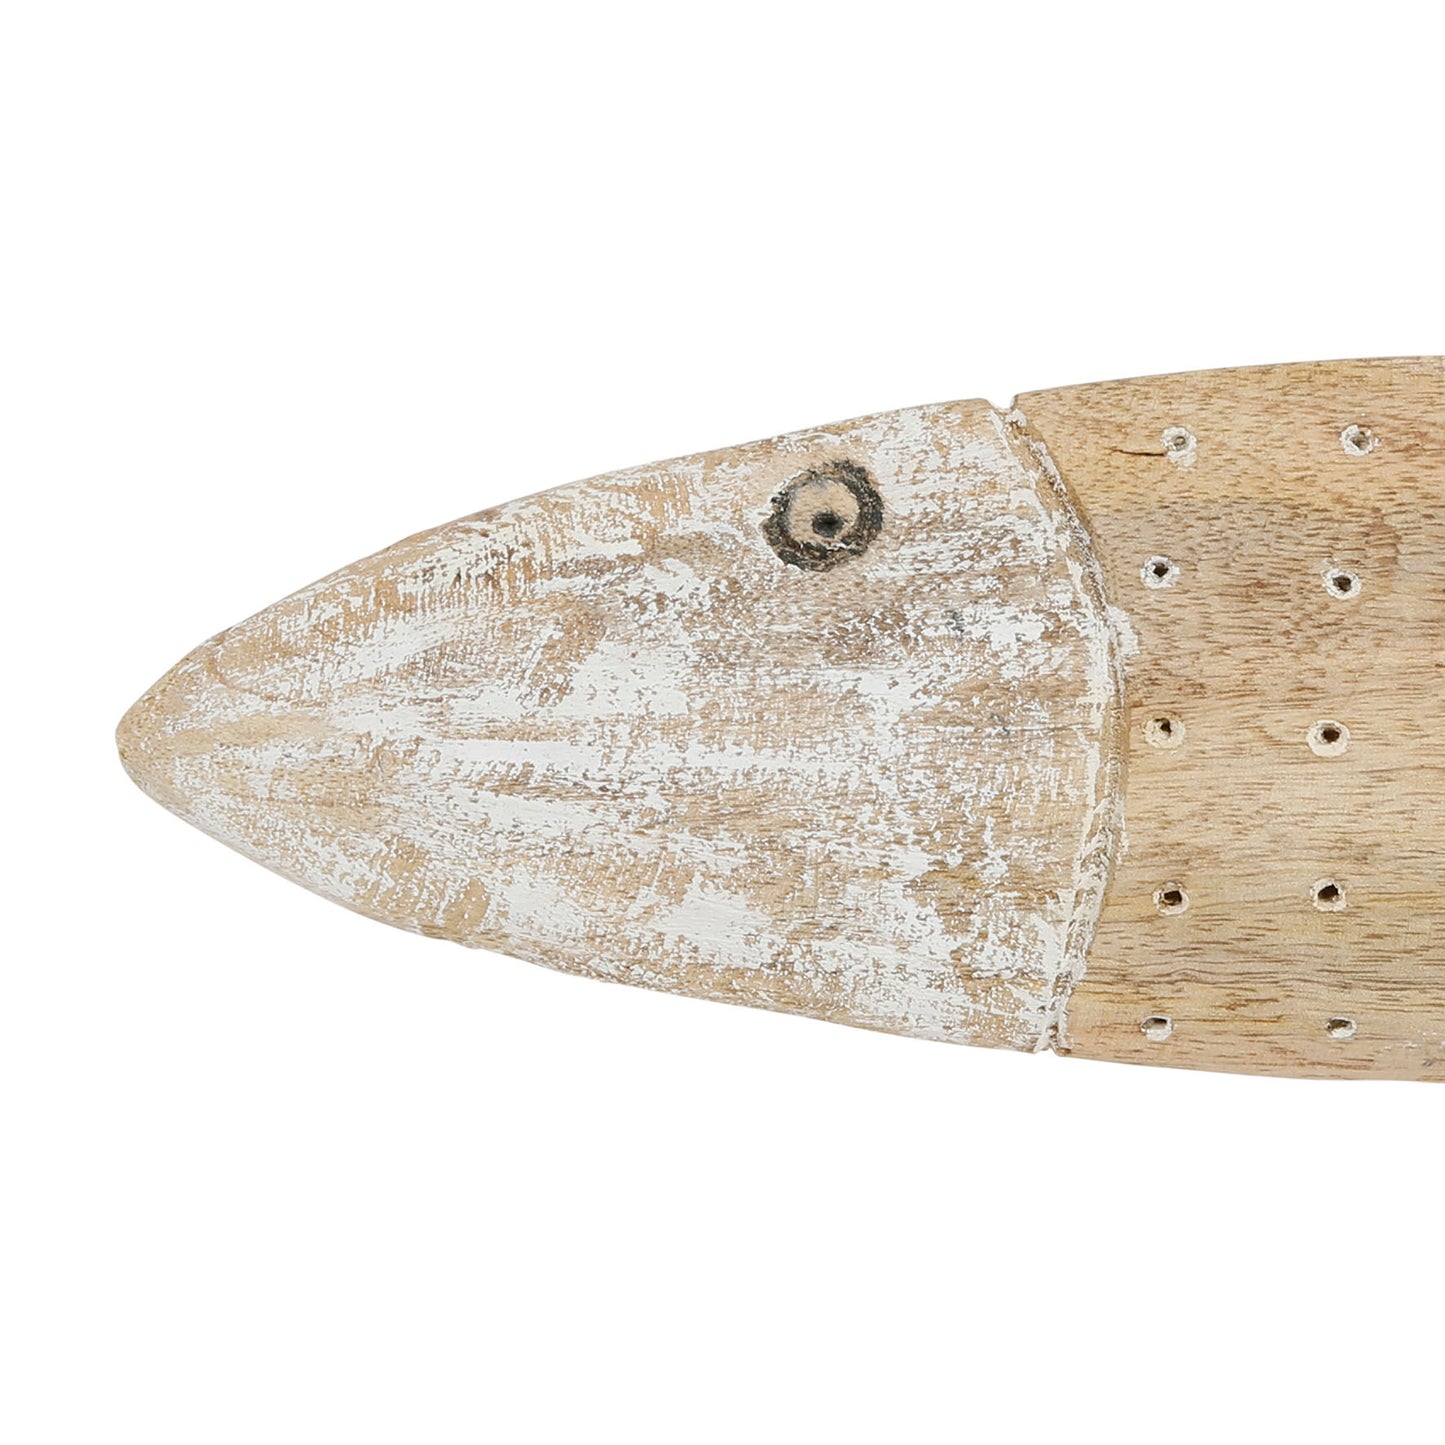 Tall decorative fish in natural mango wood & white painted finish